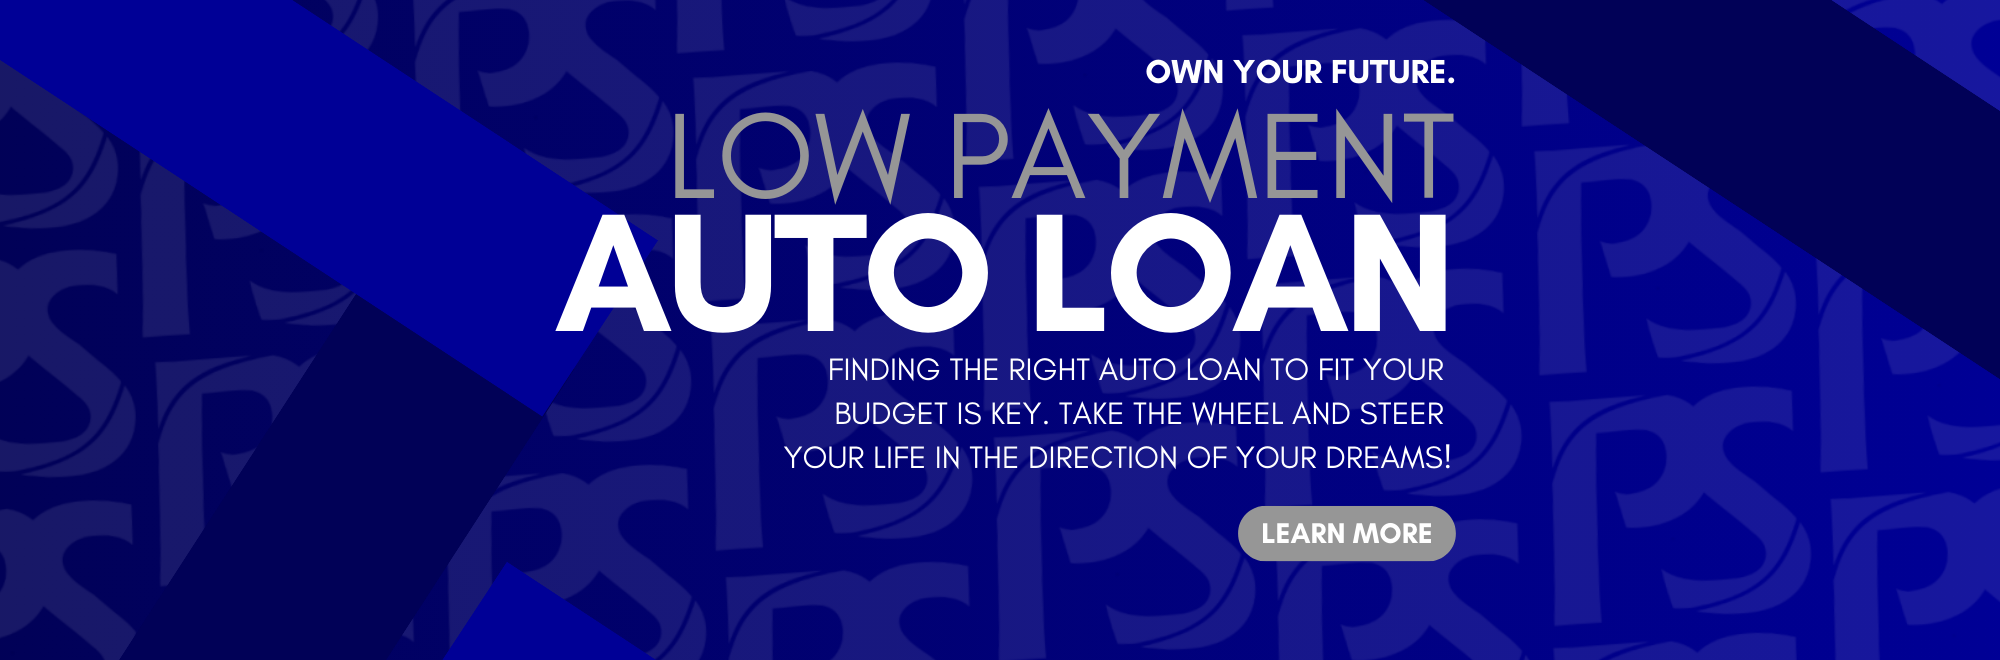 Own Your Future. Low Payment Auto Loans. Click to learn more